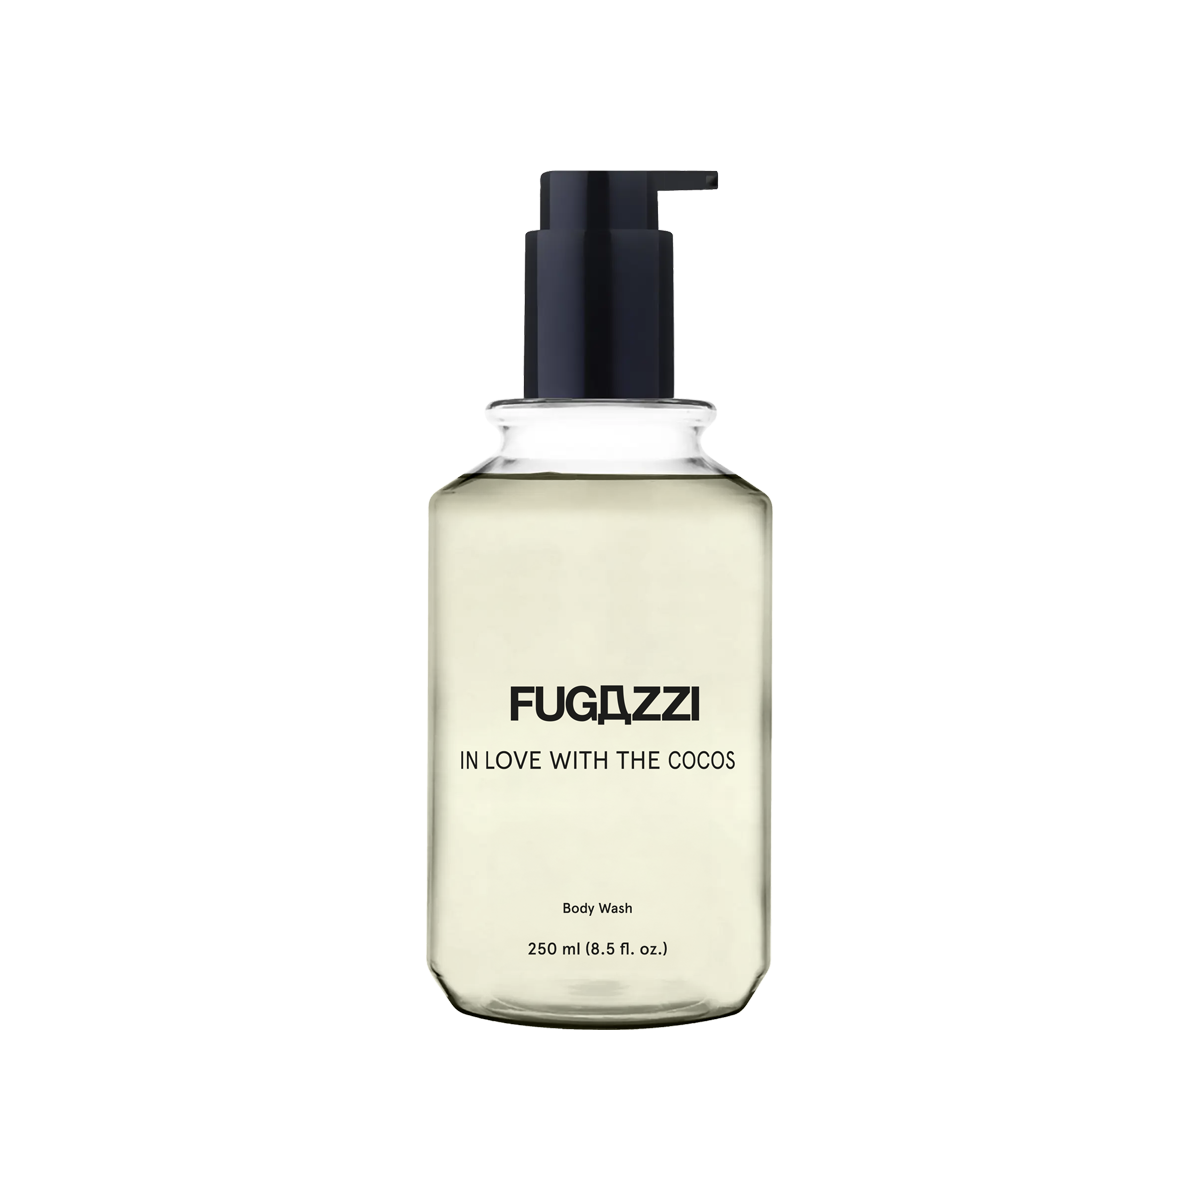 Fugazzi - In Love with the Cocos Body Wash